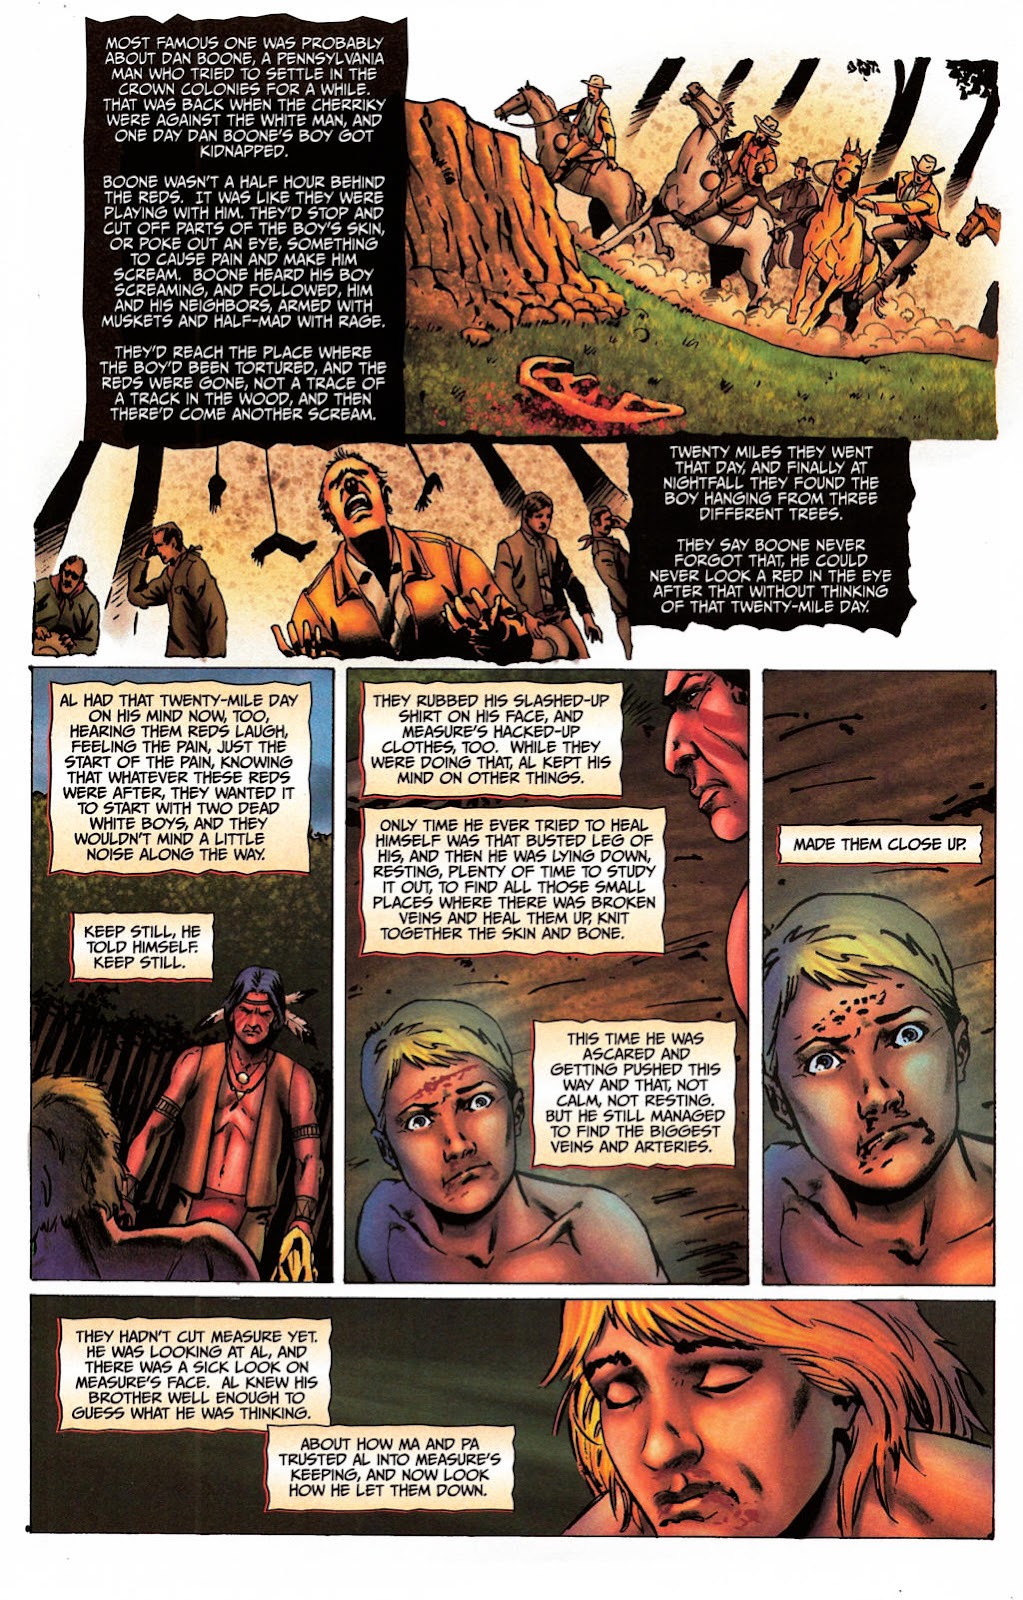 Red Prophet: The Tales of Alvin Maker issue 5 - Page 6